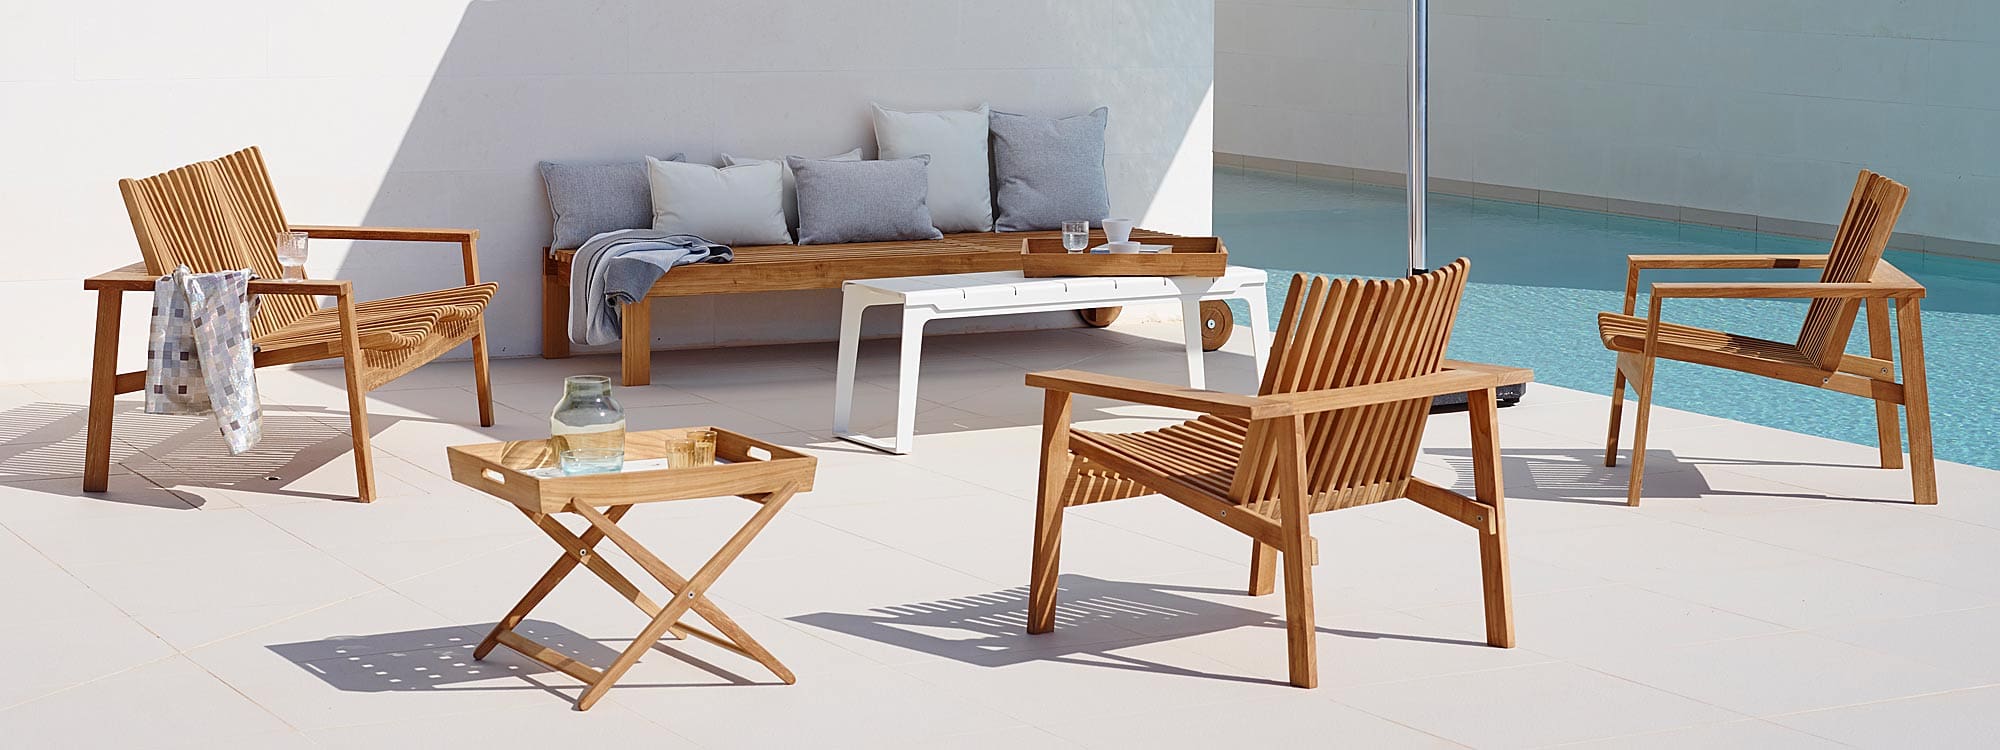 Image of Amaze teak sun lounger and 3 lounge chairs by Cane-line